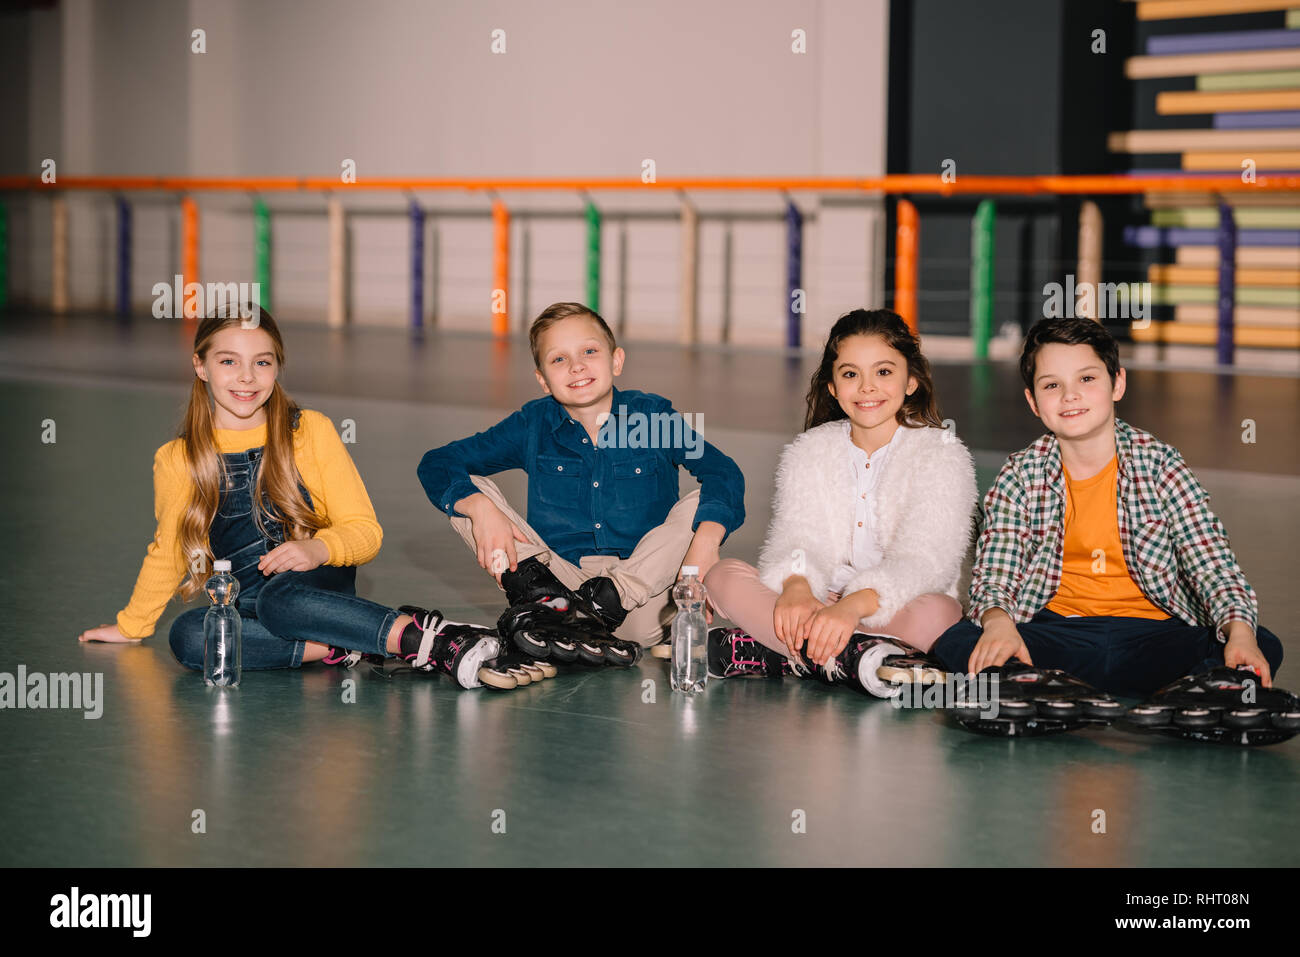 Cheerful kids in roller skates sitting on ground Stock Photo